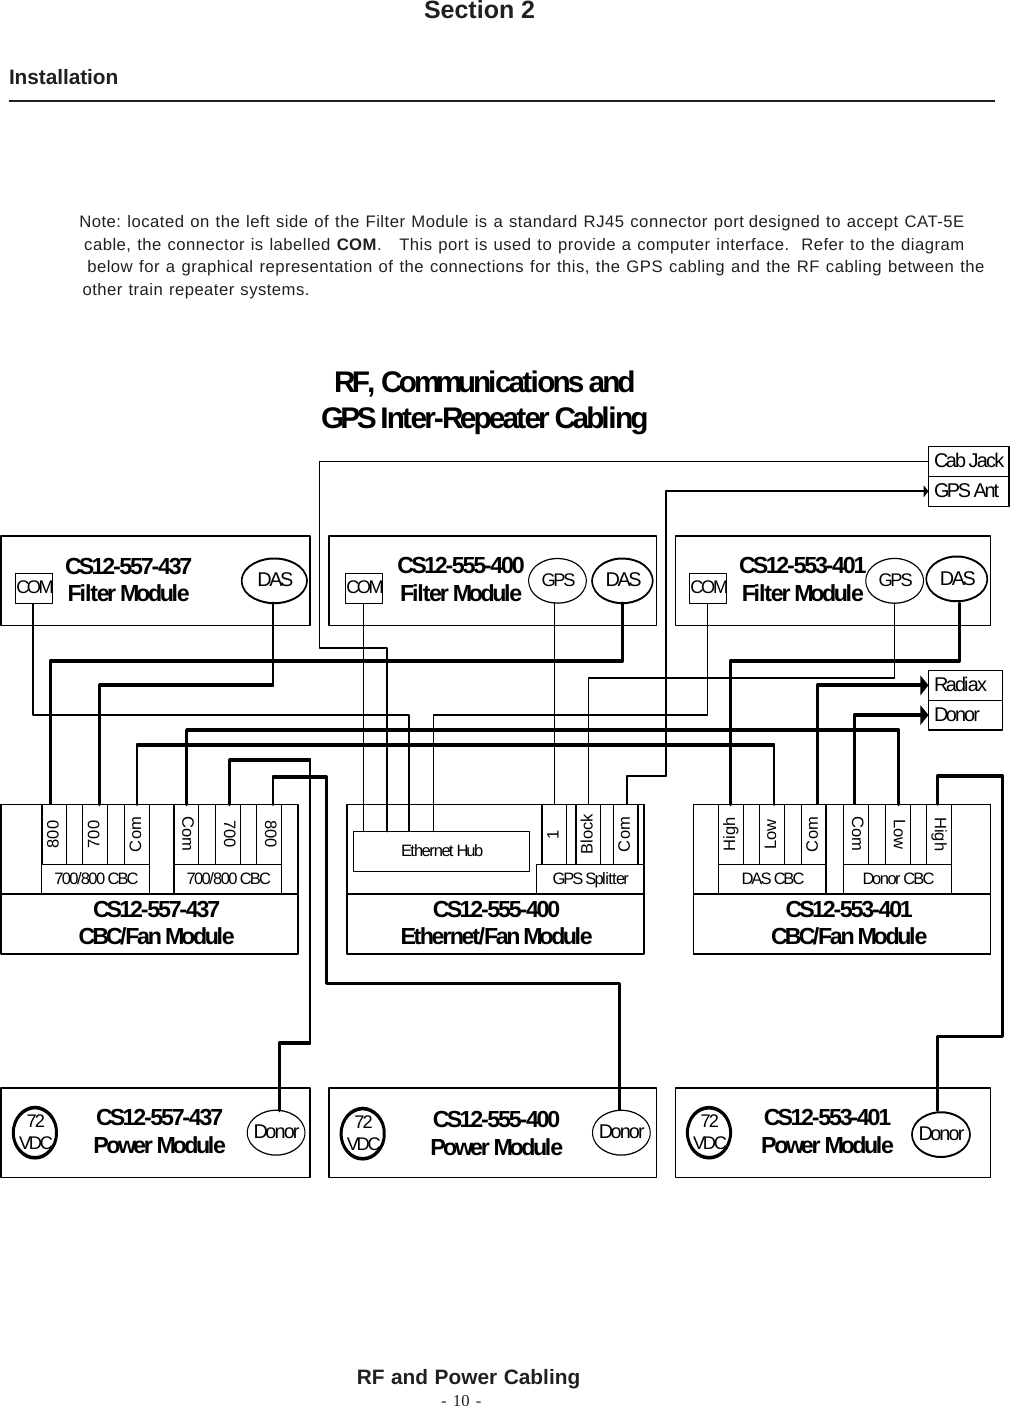 Section 2- 10 -RF and Power Cabling Note: located on the left side of the Filter Module is a standard RJ45 connector port designed to accept CAT-5E               cable, the connector is labelled COM.   This port is used to provide a computer interface.  Refer to the diagram               below for a graphical representation of the connections for this, the GPS cabling and the RF cabling between the               other train repeater systems.InstallationDASRadiaxDonorDonor CBCComLowHighDAS CBCComLowHighDASRF, Communications and GPS Inter-Repeater Cabling700/800 CBCCom700800700/800 CBCCom700800DASDonorCS12-557-437Filter ModuleCS12-557-437Power ModuleCS12-555-400Filter ModuleCS12-555-400Power ModuleCS12-553-401Filter ModuleCS12-553-401Power ModuleCS12-557-437CBC/Fan Module CS12-553-401CBC/Fan ModuleCS12-555-400Ethernet/Fan ModuleDonorDonorCab JackGPS AntGPS SplitterComBlock1Ethernet Hub72VDCGPS GPS72VDC72VDCCOM COM COM